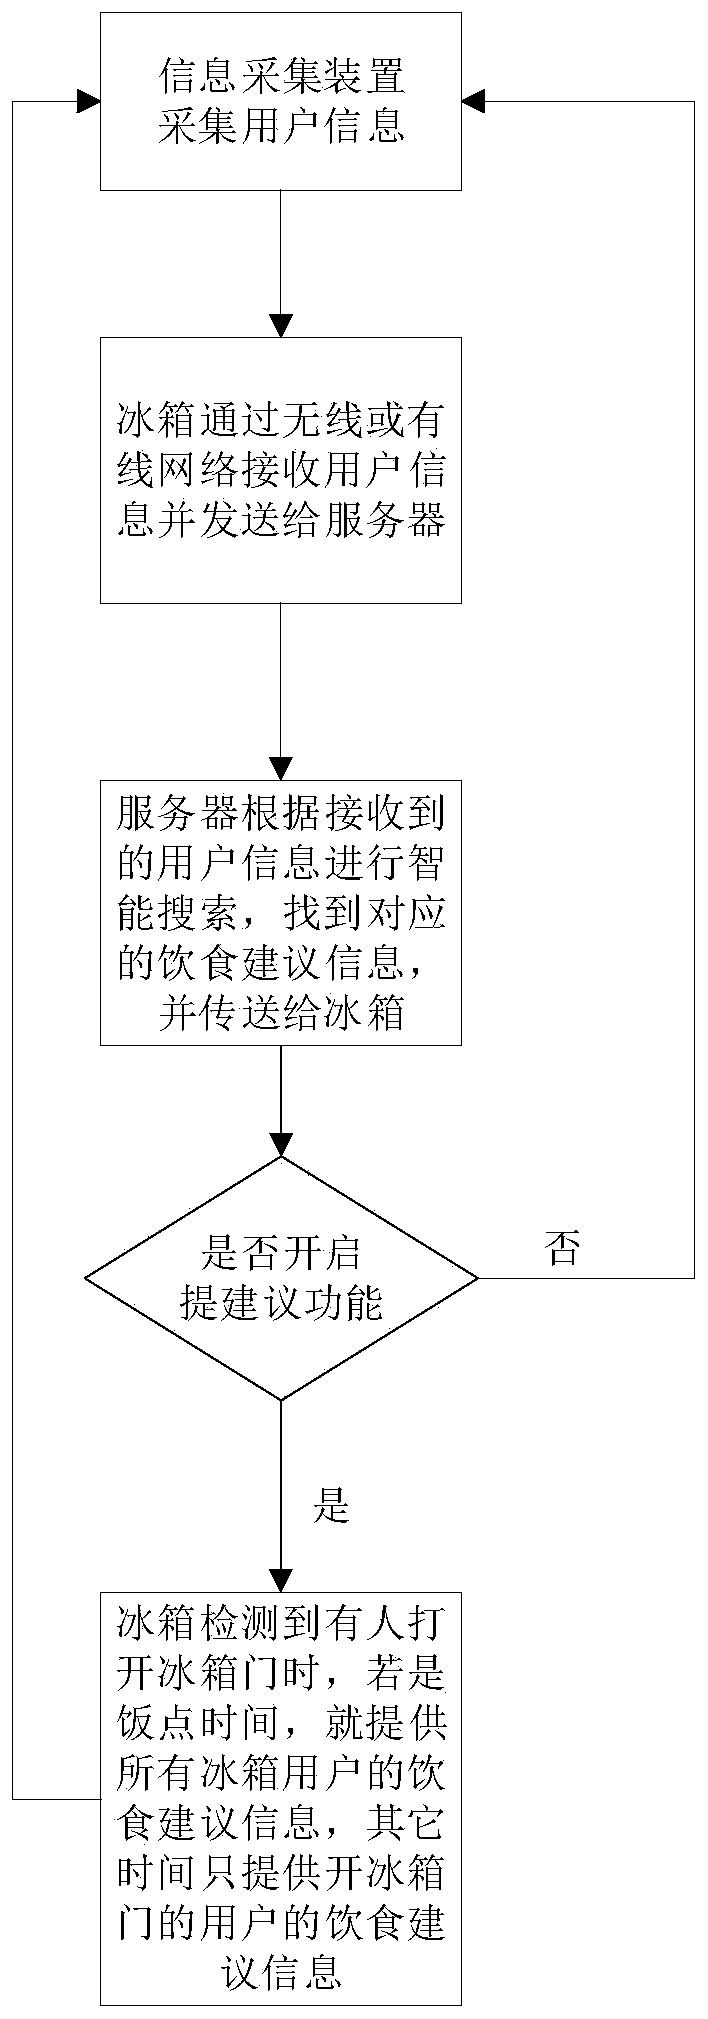 Diet reminding method, diet reminding device, control panel, server and refrigerator